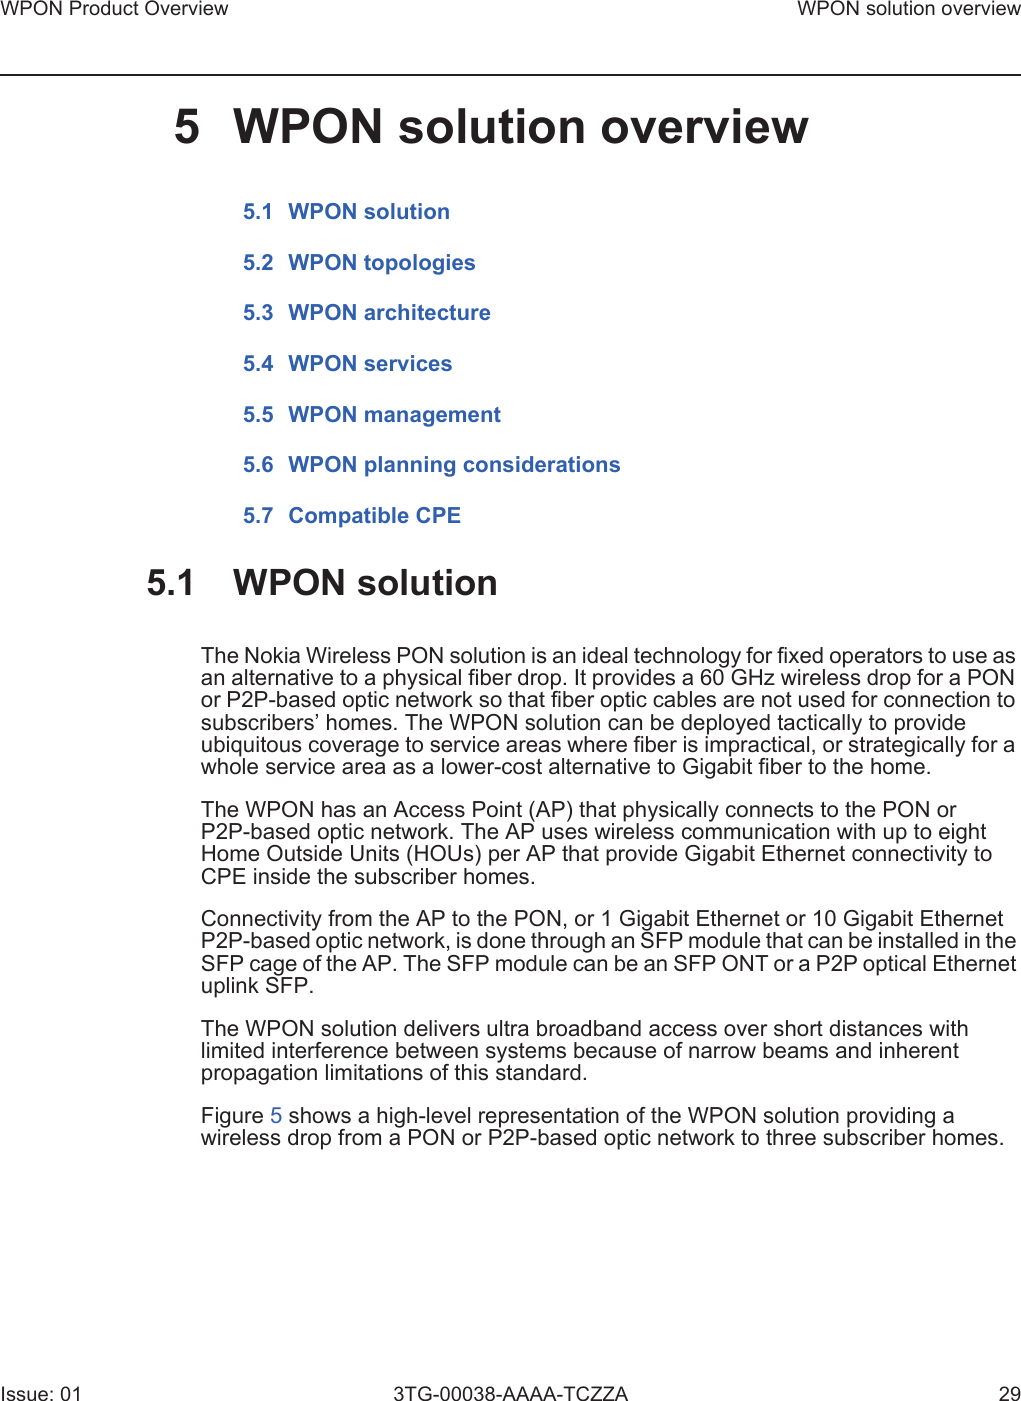 WPON Product Overview WPON solution overviewIssue: 01 3TG-00038-AAAA-TCZZA 295 WPON solution overview5.1 WPON solution5.2 WPON topologies5.3 WPON architecture5.4 WPON services5.5 WPON management5.6 WPON planning considerations5.7 Compatible CPE5.1 WPON solutionThe Nokia Wireless PON solution is an ideal technology for fixed operators to use as an alternative to a physical fiber drop. It provides a 60 GHz wireless drop for a PON or P2P-based optic network so that fiber optic cables are not used for connection to subscribers’ homes. The WPON solution can be deployed tactically to provide ubiquitous coverage to service areas where fiber is impractical, or strategically for a whole service area as a lower-cost alternative to Gigabit fiber to the home.The WPON has an Access Point (AP) that physically connects to the PON or P2P-based optic network. The AP uses wireless communication with up to eight Home Outside Units (HOUs) per AP that provide Gigabit Ethernet connectivity to CPE inside the subscriber homes. Connectivity from the AP to the PON, or 1 Gigabit Ethernet or 10 Gigabit Ethernet P2P-based optic network, is done through an SFP module that can be installed in the SFP cage of the AP. The SFP module can be an SFP ONT or a P2P optical Ethernet uplink SFP.The WPON solution delivers ultra broadband access over short distances with limited interference between systems because of narrow beams and inherent propagation limitations of this standard.Figure 5 shows a high-level representation of the WPON solution providing a wireless drop from a PON or P2P-based optic network to three subscriber homes.